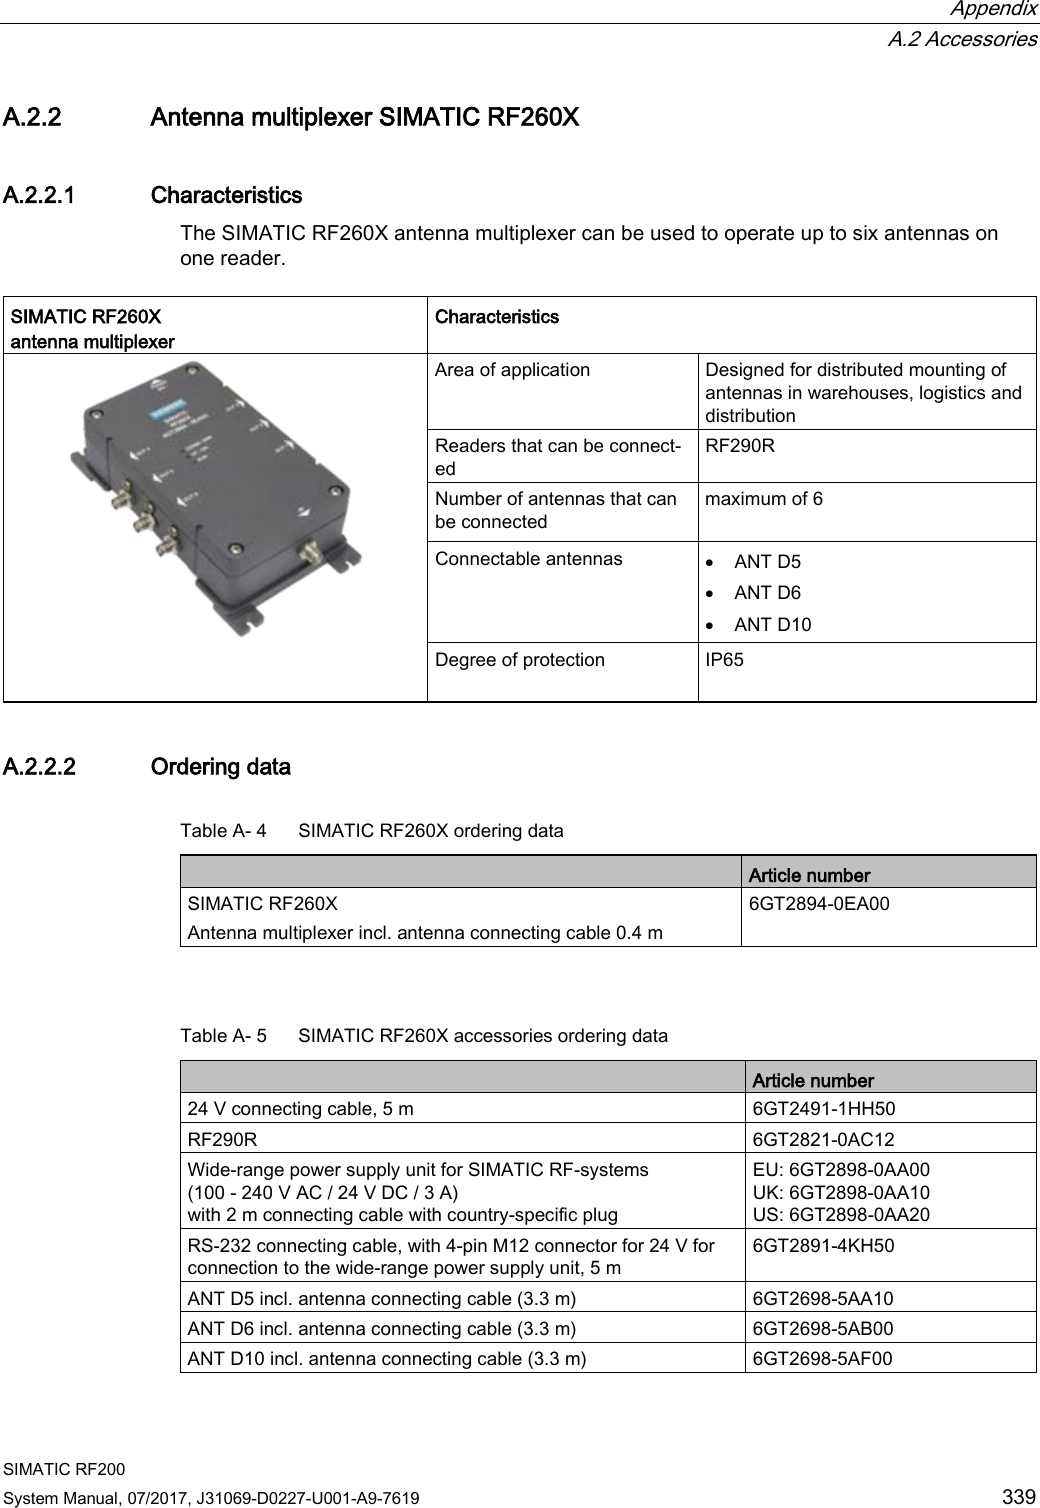  Appendix  A.2 Accessories SIMATIC RF200 System Manual, 07/2017, J31069-D0227-U001-A9-7619 339 A.2.2 Antenna multiplexer SIMATIC RF260X A.2.2.1 Characteristics The SIMATIC RF260X antenna multiplexer can be used to operate up to six antennas on one reader.  SIMATIC RF260X  antenna multiplexer Characteristics  Area of application Designed for distributed mounting of antennas in warehouses, logistics and distribution Readers that can be connect-ed  RF290R Number of antennas that can be connected maximum of 6  Connectable antennas • ANT D5 • ANT D6 • ANT D10 Degree of protection  IP65  A.2.2.2 Ordering data Table A- 4  SIMATIC RF260X ordering data  Article number SIMATIC RF260X Antenna multiplexer incl. antenna connecting cable 0.4 m 6GT2894-0EA00  Table A- 5  SIMATIC RF260X accessories ordering data  Article number 24 V connecting cable, 5 m 6GT2491-1HH50 RF290R 6GT2821-0AC12 Wide-range power supply unit for SIMATIC RF-systems  (100 - 240 V AC / 24 V DC / 3 A)  with 2 m connecting cable with country-specific plug EU: 6GT2898-0AA00 UK: 6GT2898-0AA10 US: 6GT2898-0AA20 RS-232 connecting cable, with 4-pin M12 connector for 24 V for connection to the wide-range power supply unit, 5 m 6GT2891-4KH50 ANT D5 incl. antenna connecting cable (3.3 m) 6GT2698-5AA10 ANT D6 incl. antenna connecting cable (3.3 m) 6GT2698-5AB00 ANT D10 incl. antenna connecting cable (3.3 m) 6GT2698-5AF00 